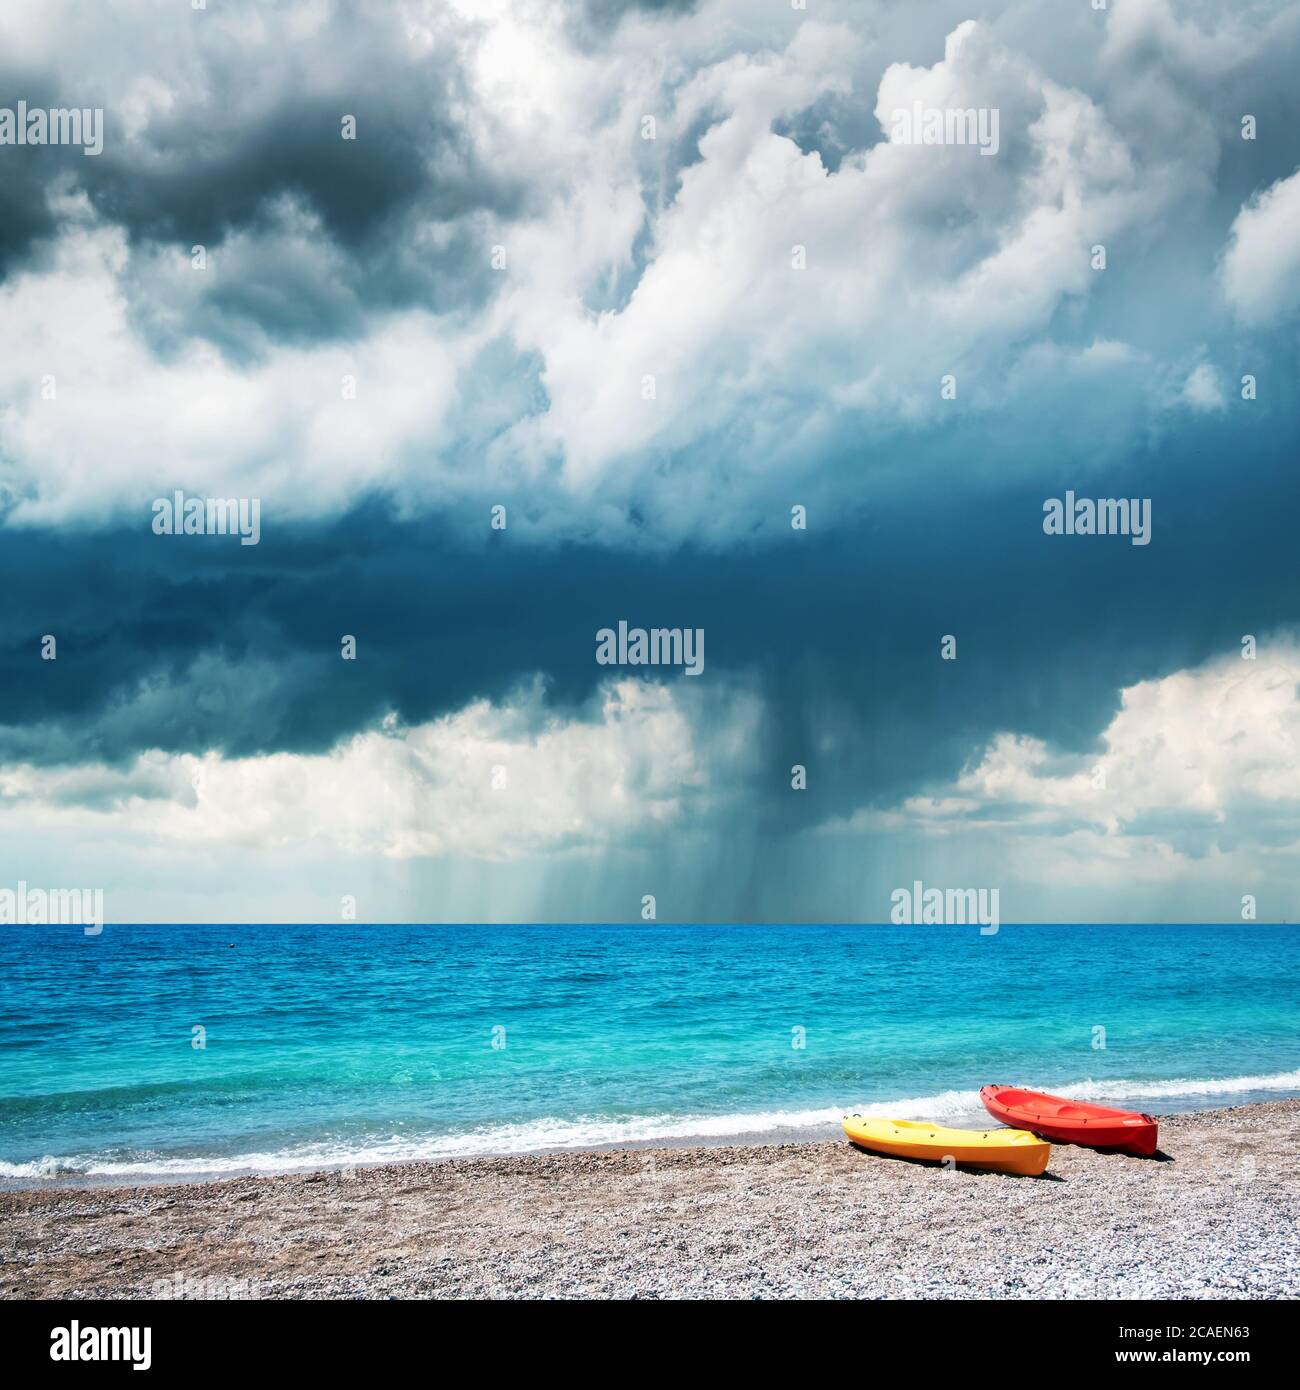 Two kayaks on sea edge. Dramatic storm clouds with rain on background. Summer time Stock Photo